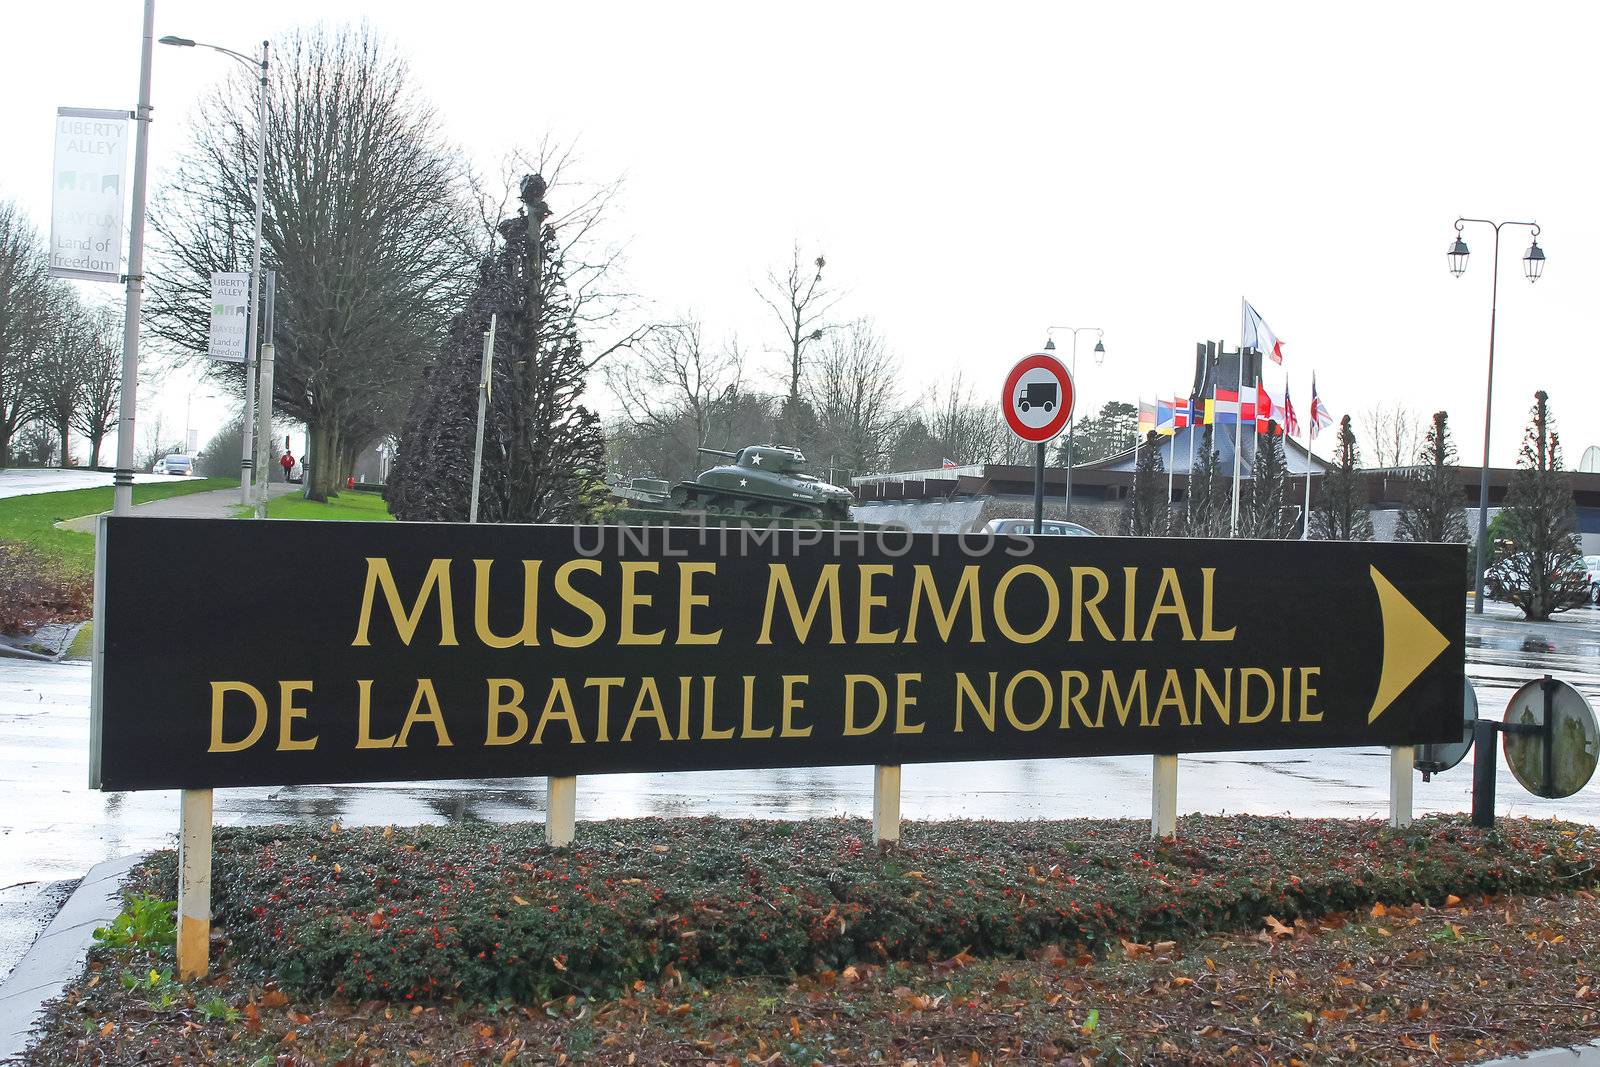 Memorial museum of the Battle of Normandy. France by NickNick